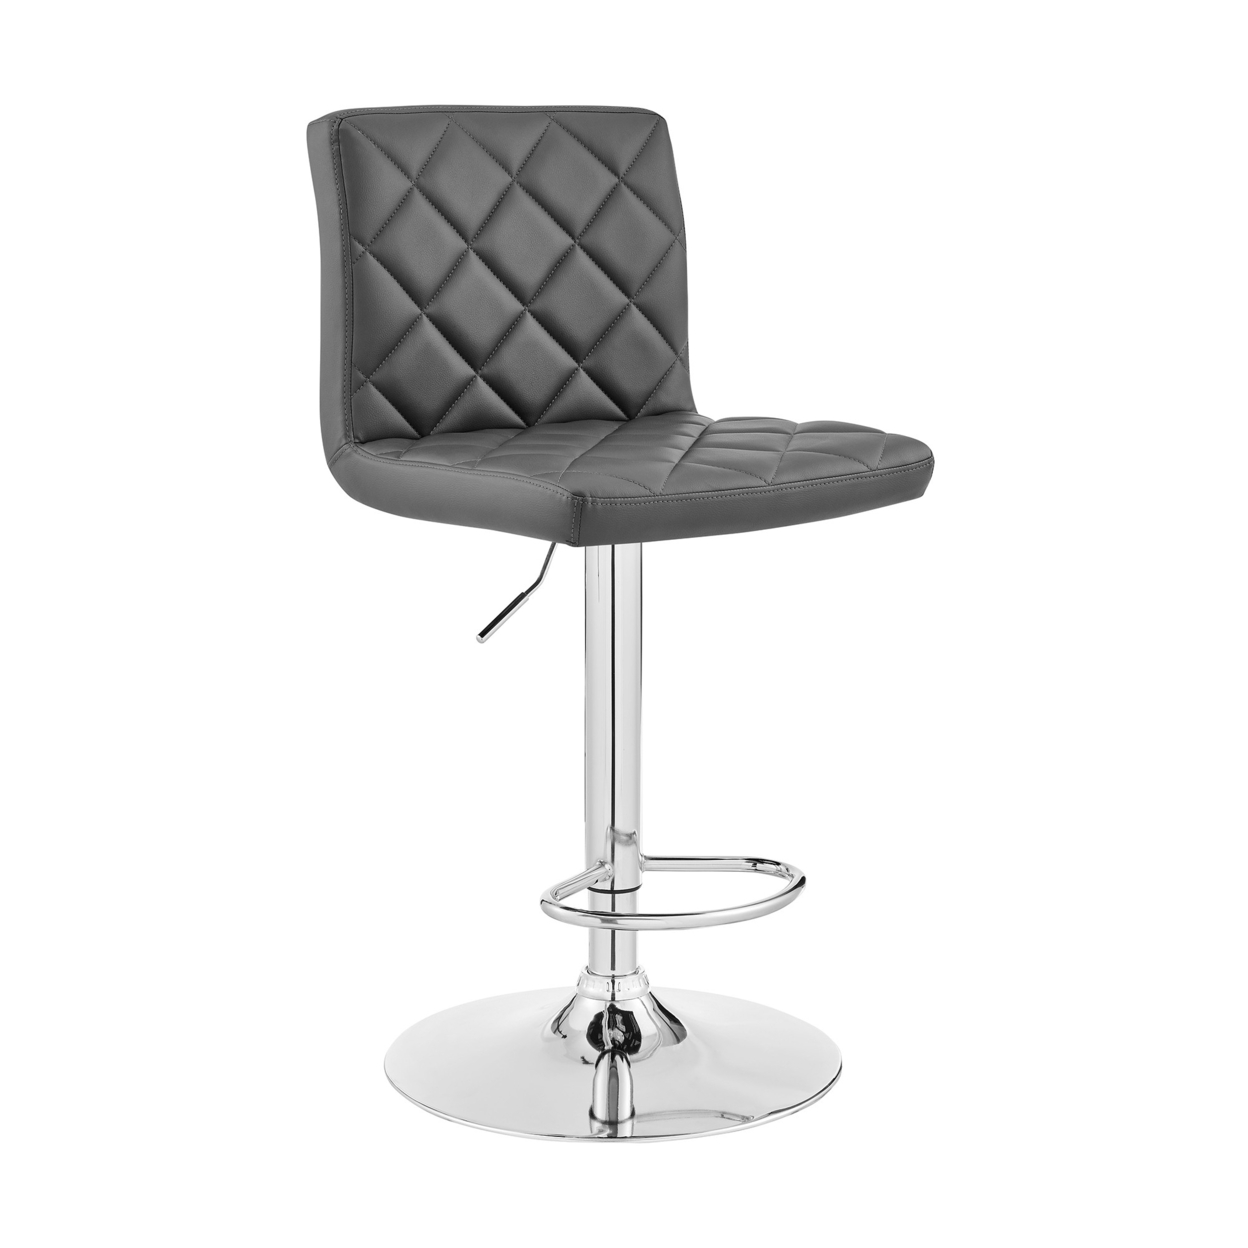 20 Inch Metal And Leatherette Swivel Bar Stool, Gray And Silver- Saltoro Sherpi